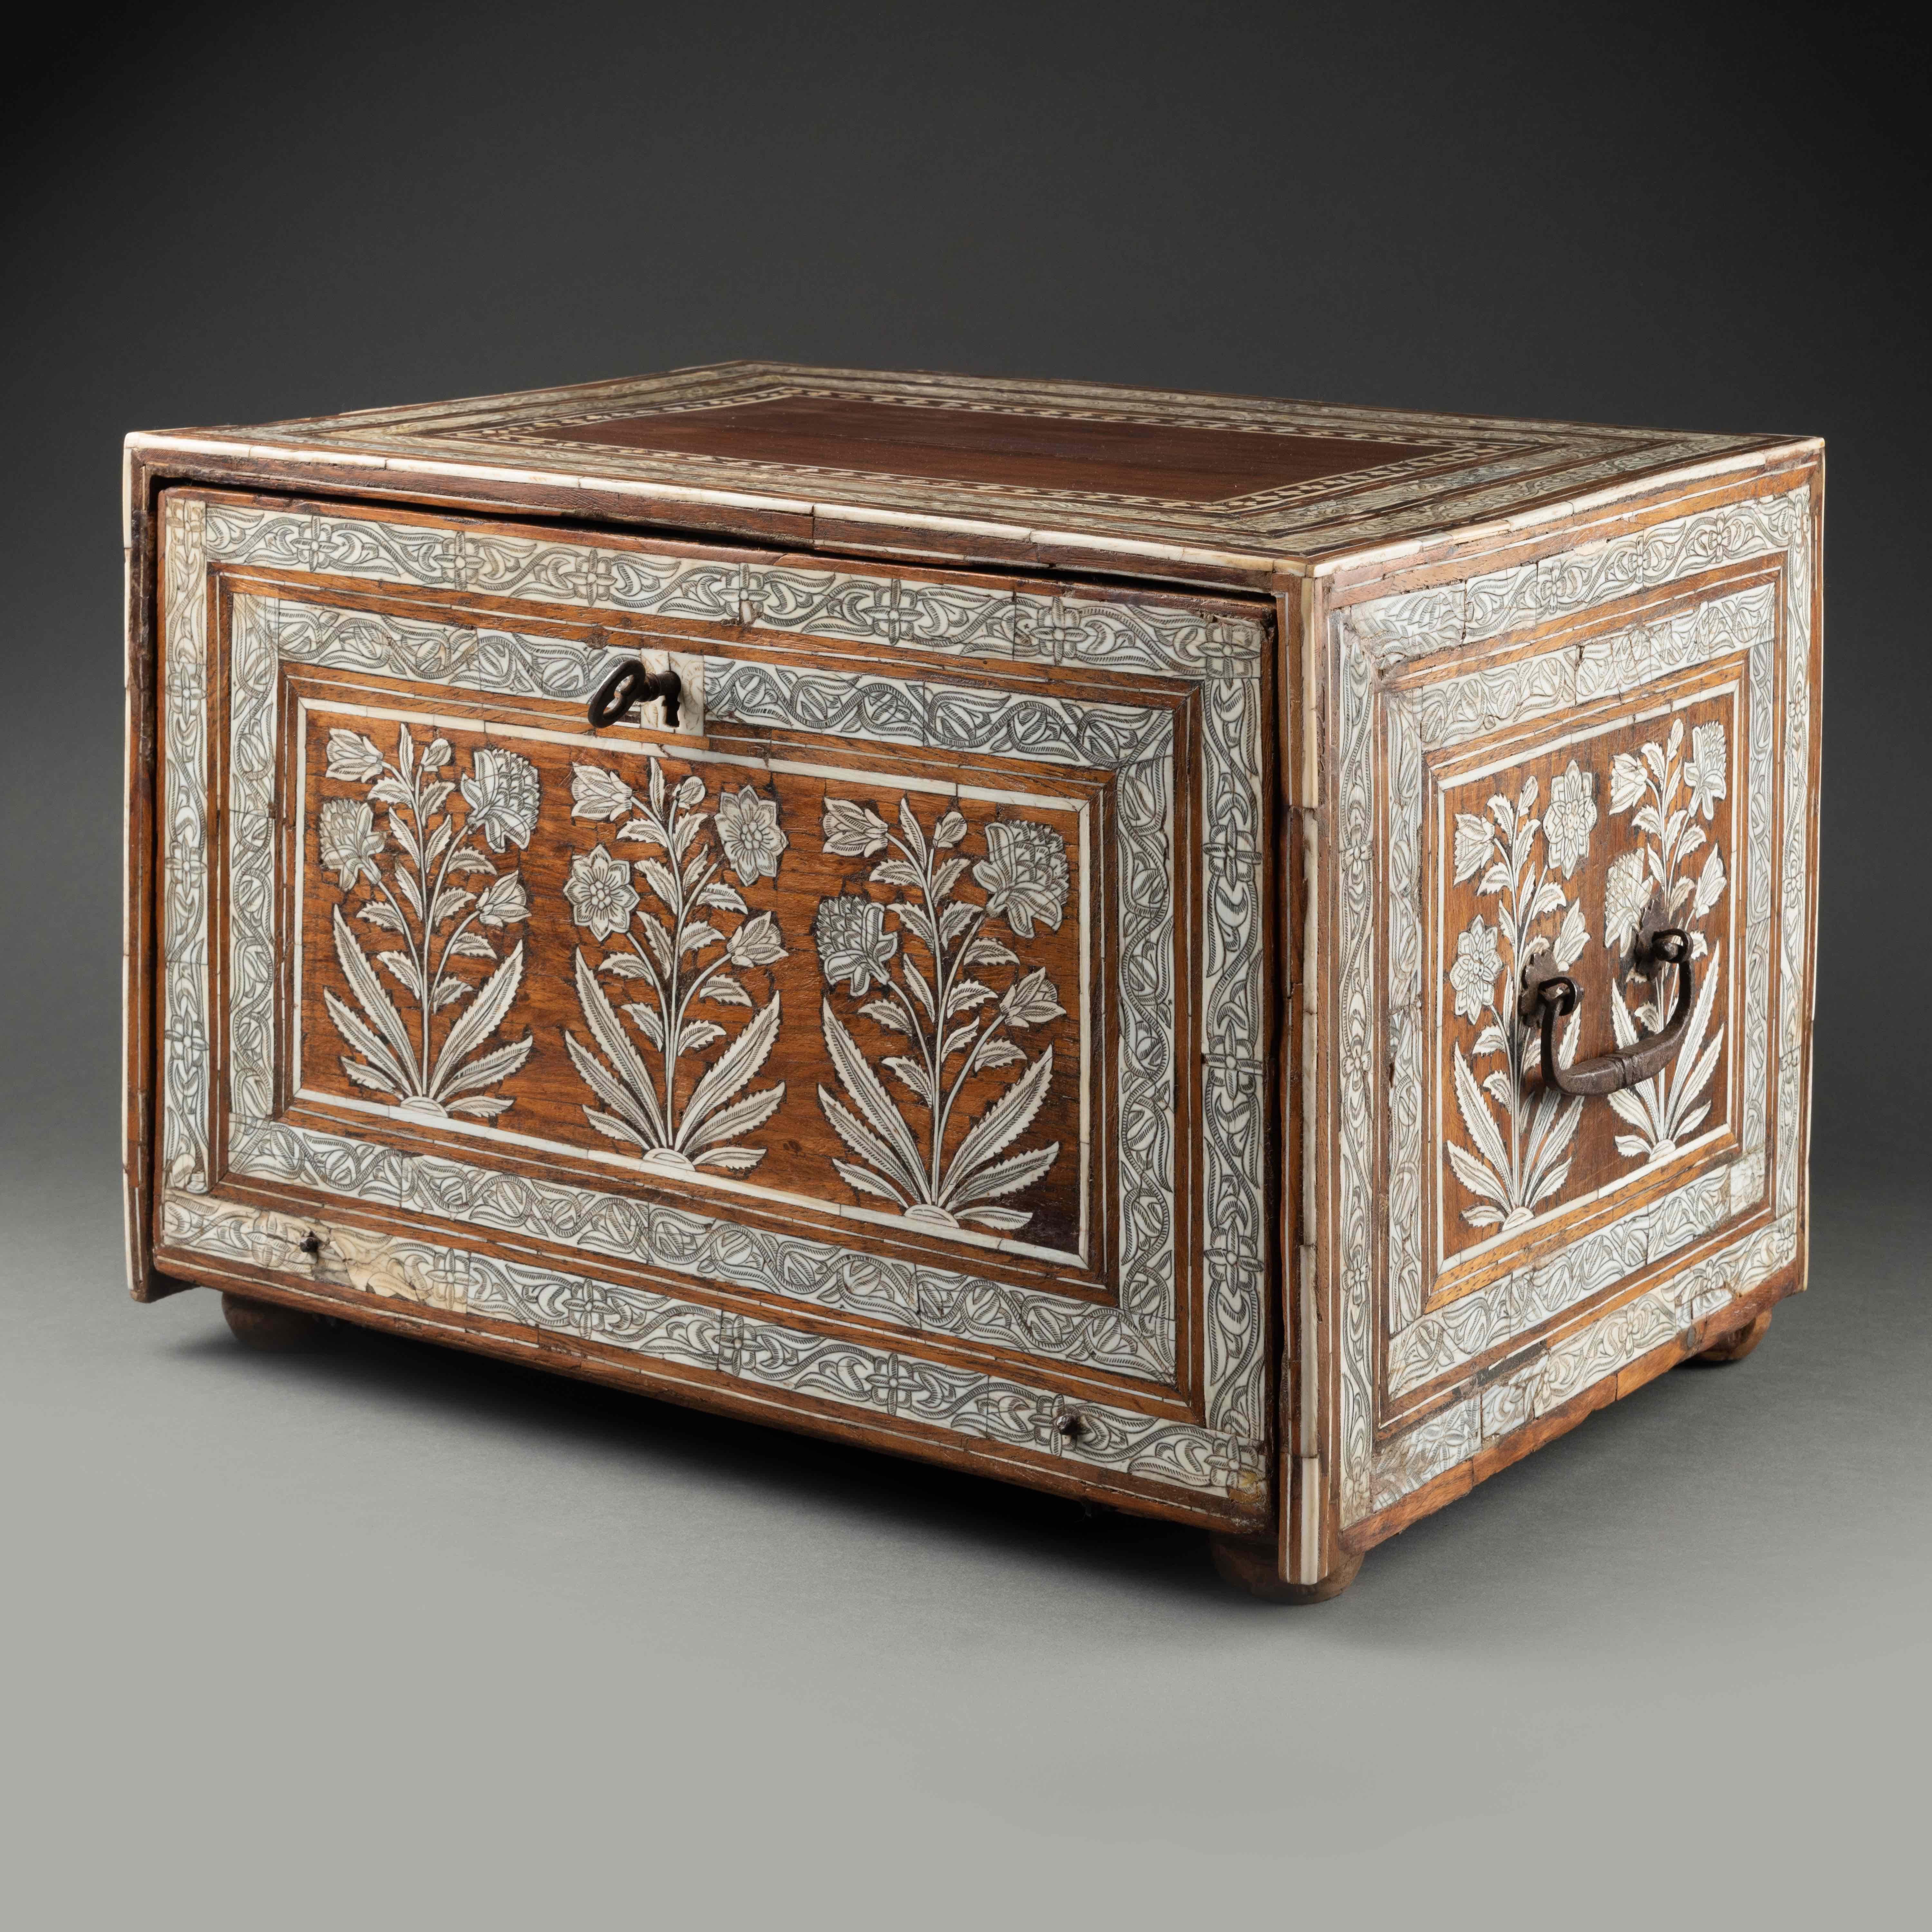 Indian Mughal Ivory Inlaid Wood Cabinet, 17th Century For Sale